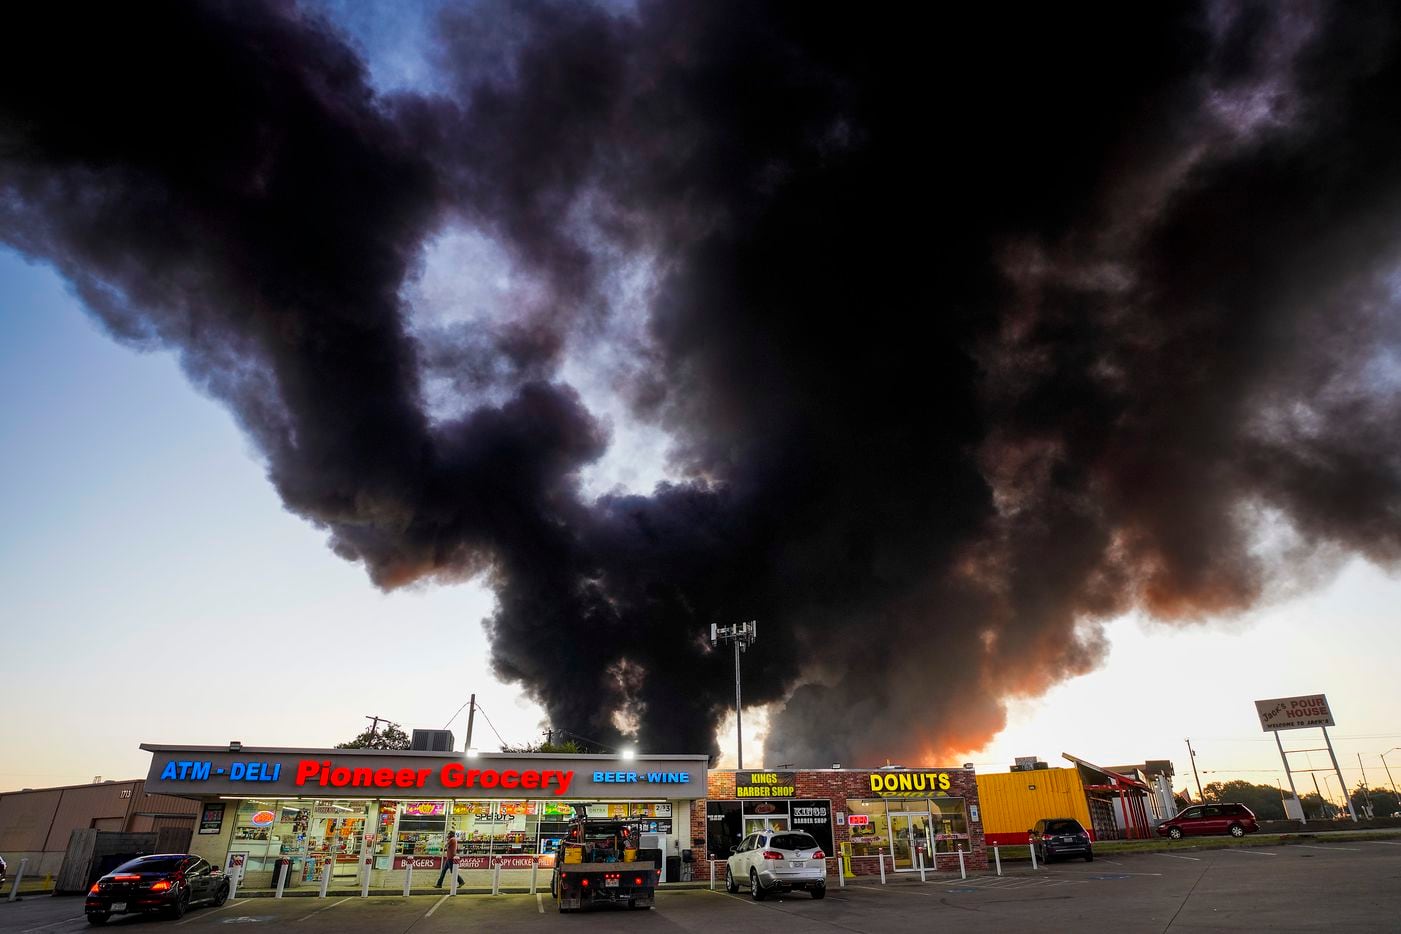 A plume of smoke rises over businesses at the corner of Great Southwest Parkway and Marshall Drive as fire crews battle a massive blaze in an industrial area of Grand Prairie just before sunrise on Wednesday, Aug. 19, 2020.